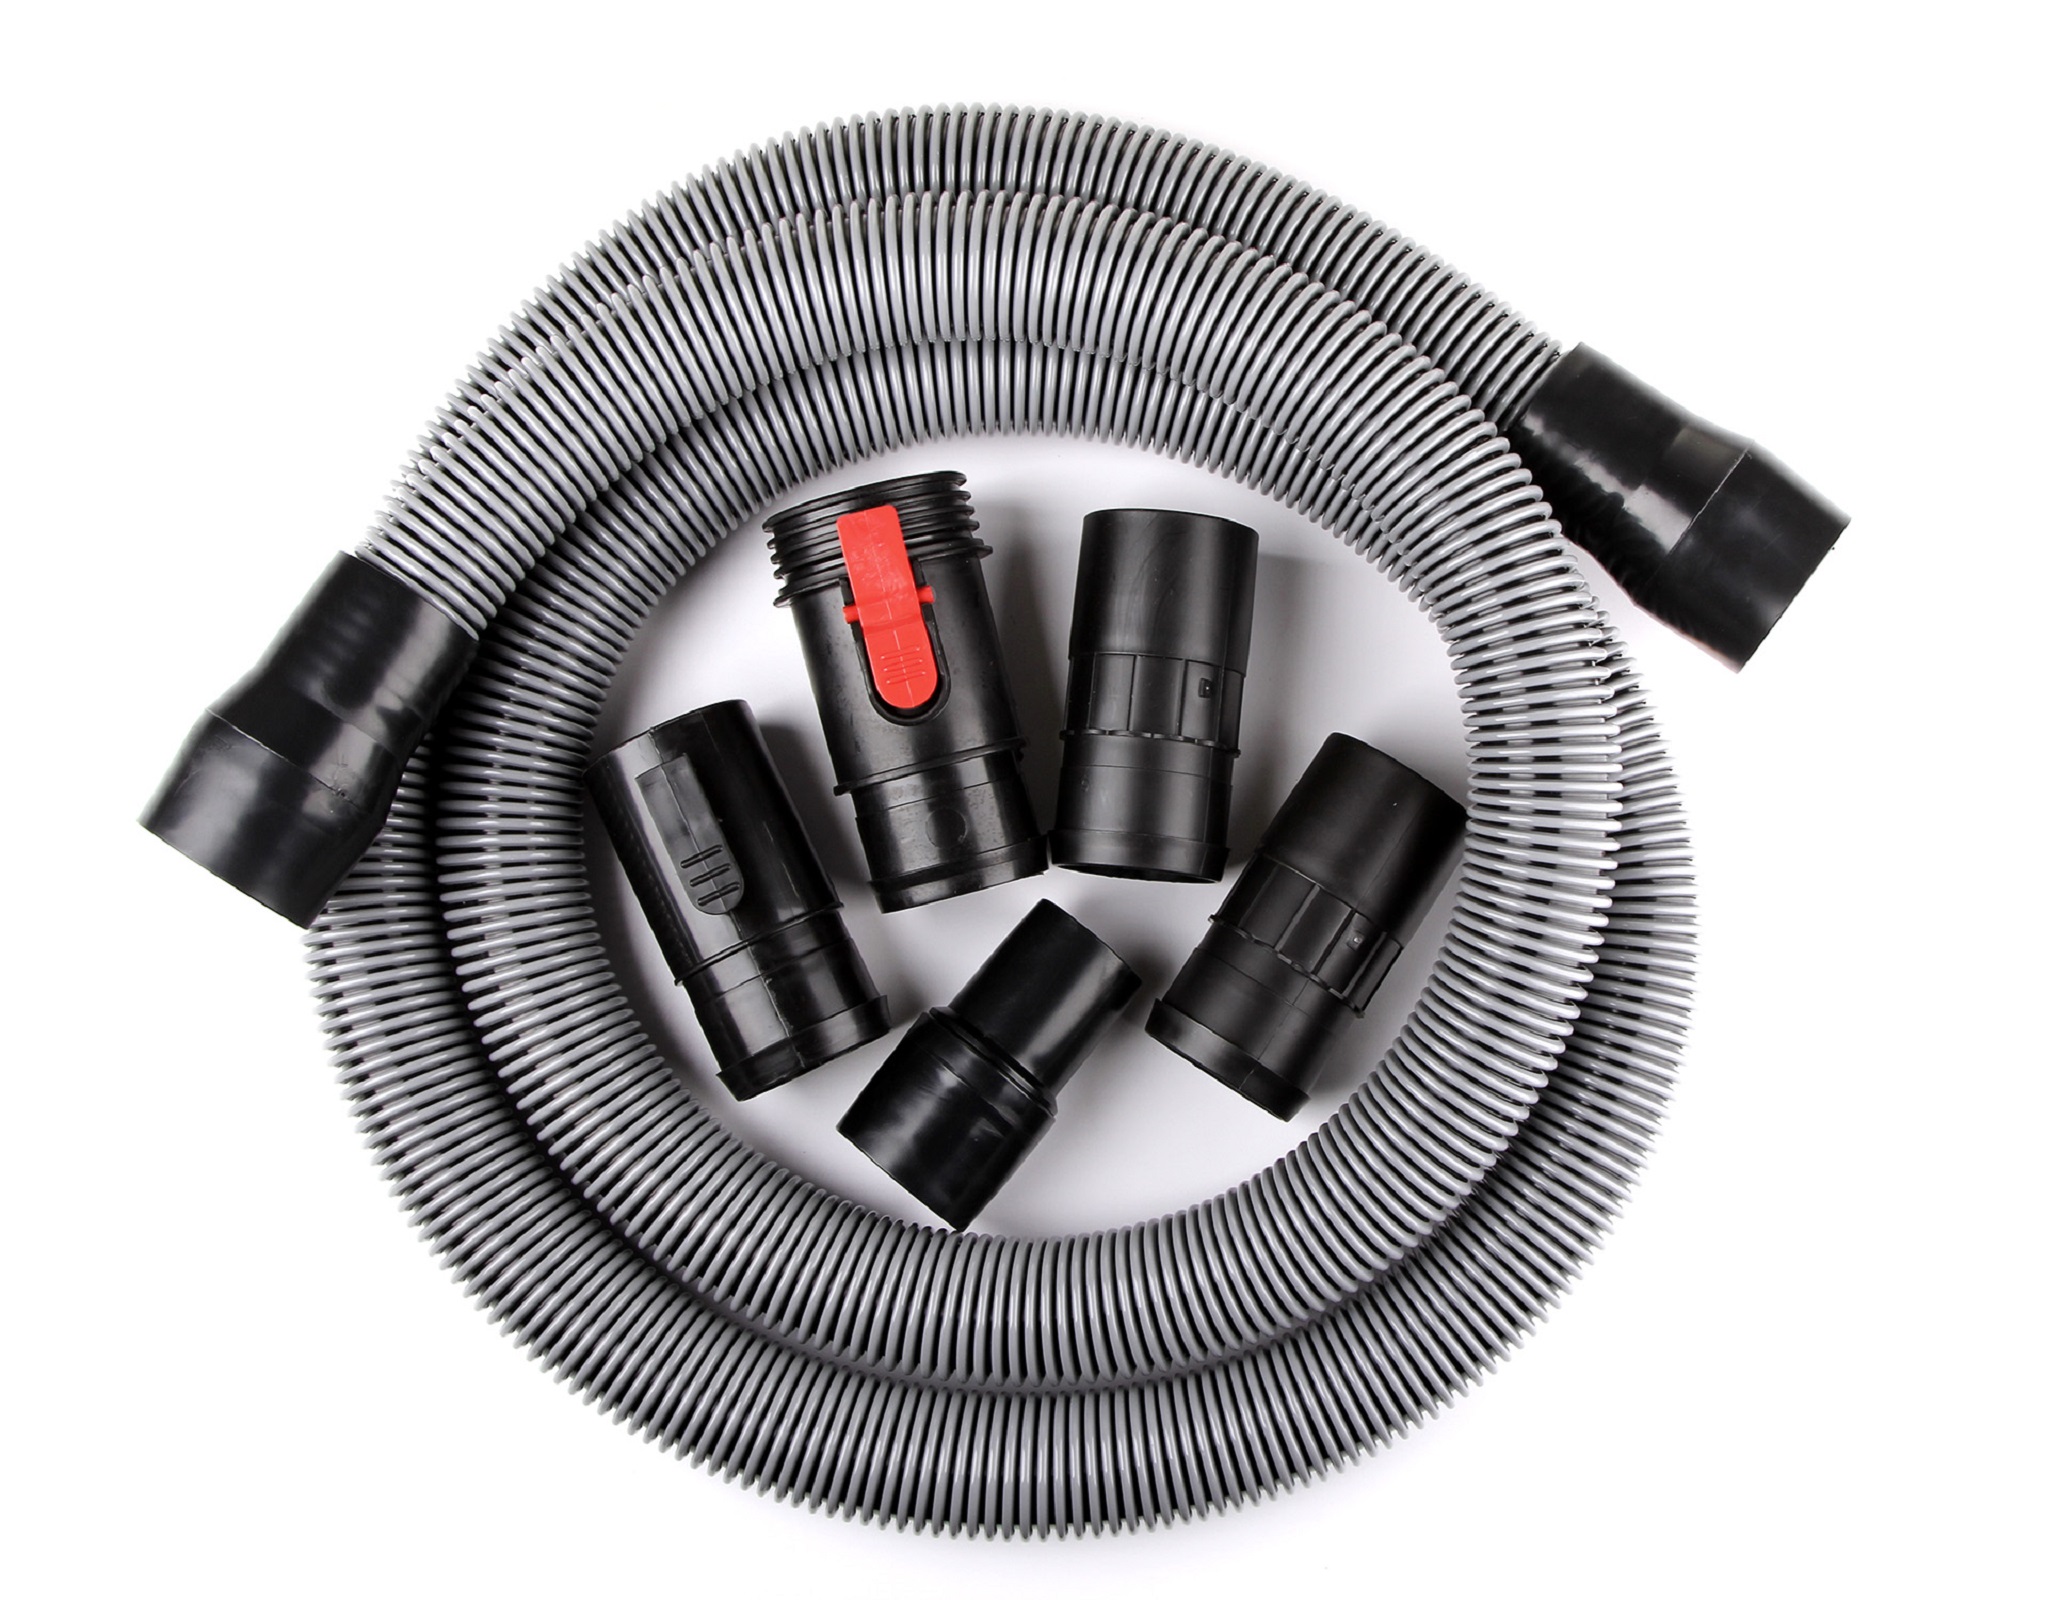 WORKSHOP Wet Dry Vacs WS17823A Wet Dry Vacuum Hose, 1-7/8-Inch x 10-Ft Heavy Duty Contractor Hose for Wet Dry Shop Vacuums